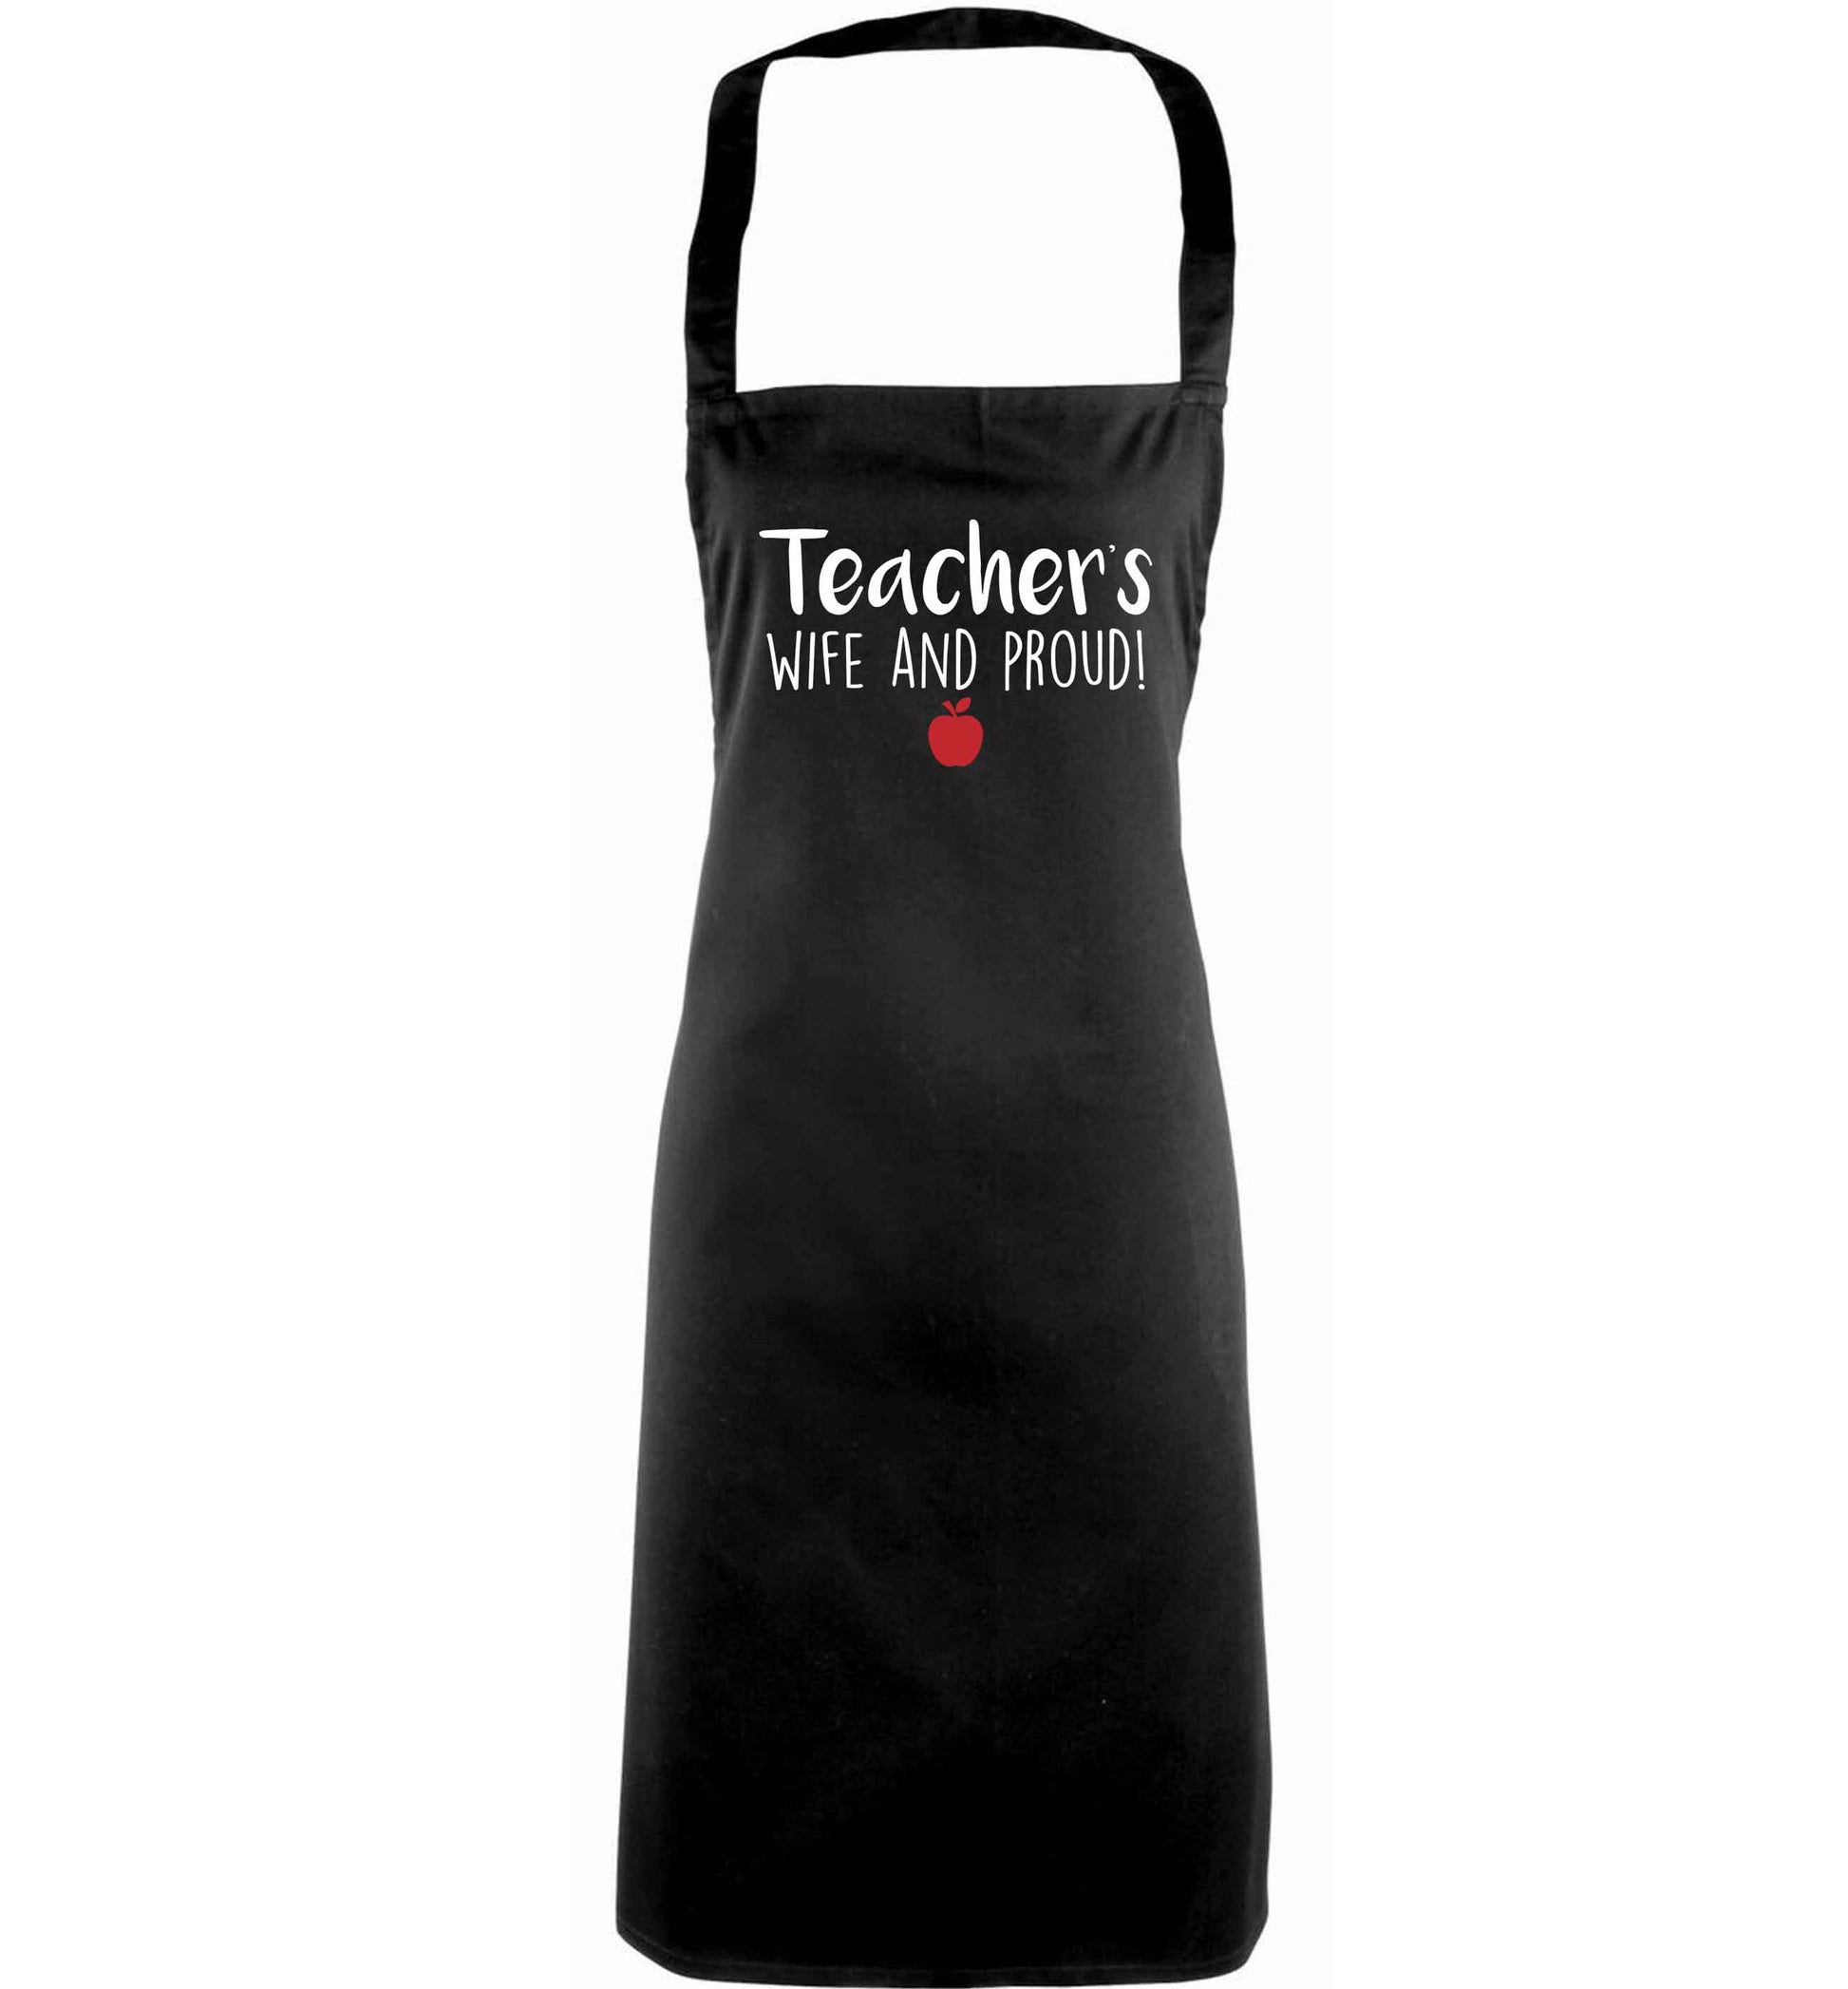 Teachers wife and proud adults black apron